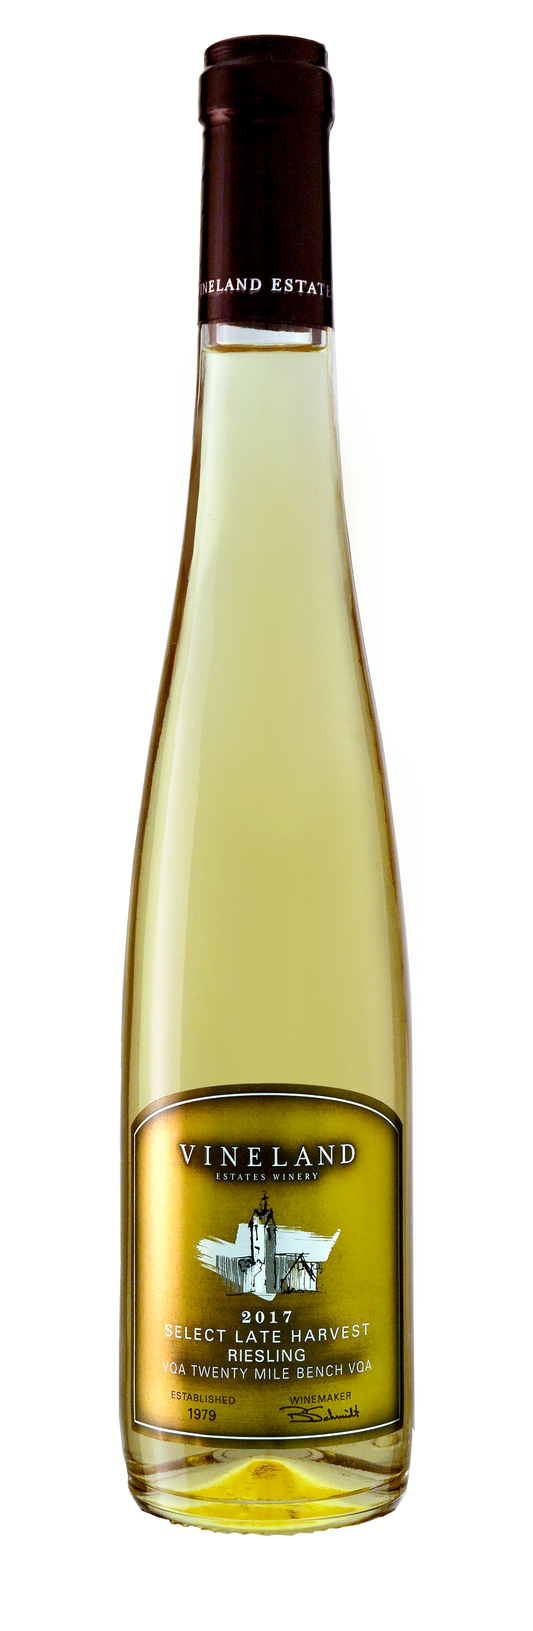 Select Late Harvest Riesling